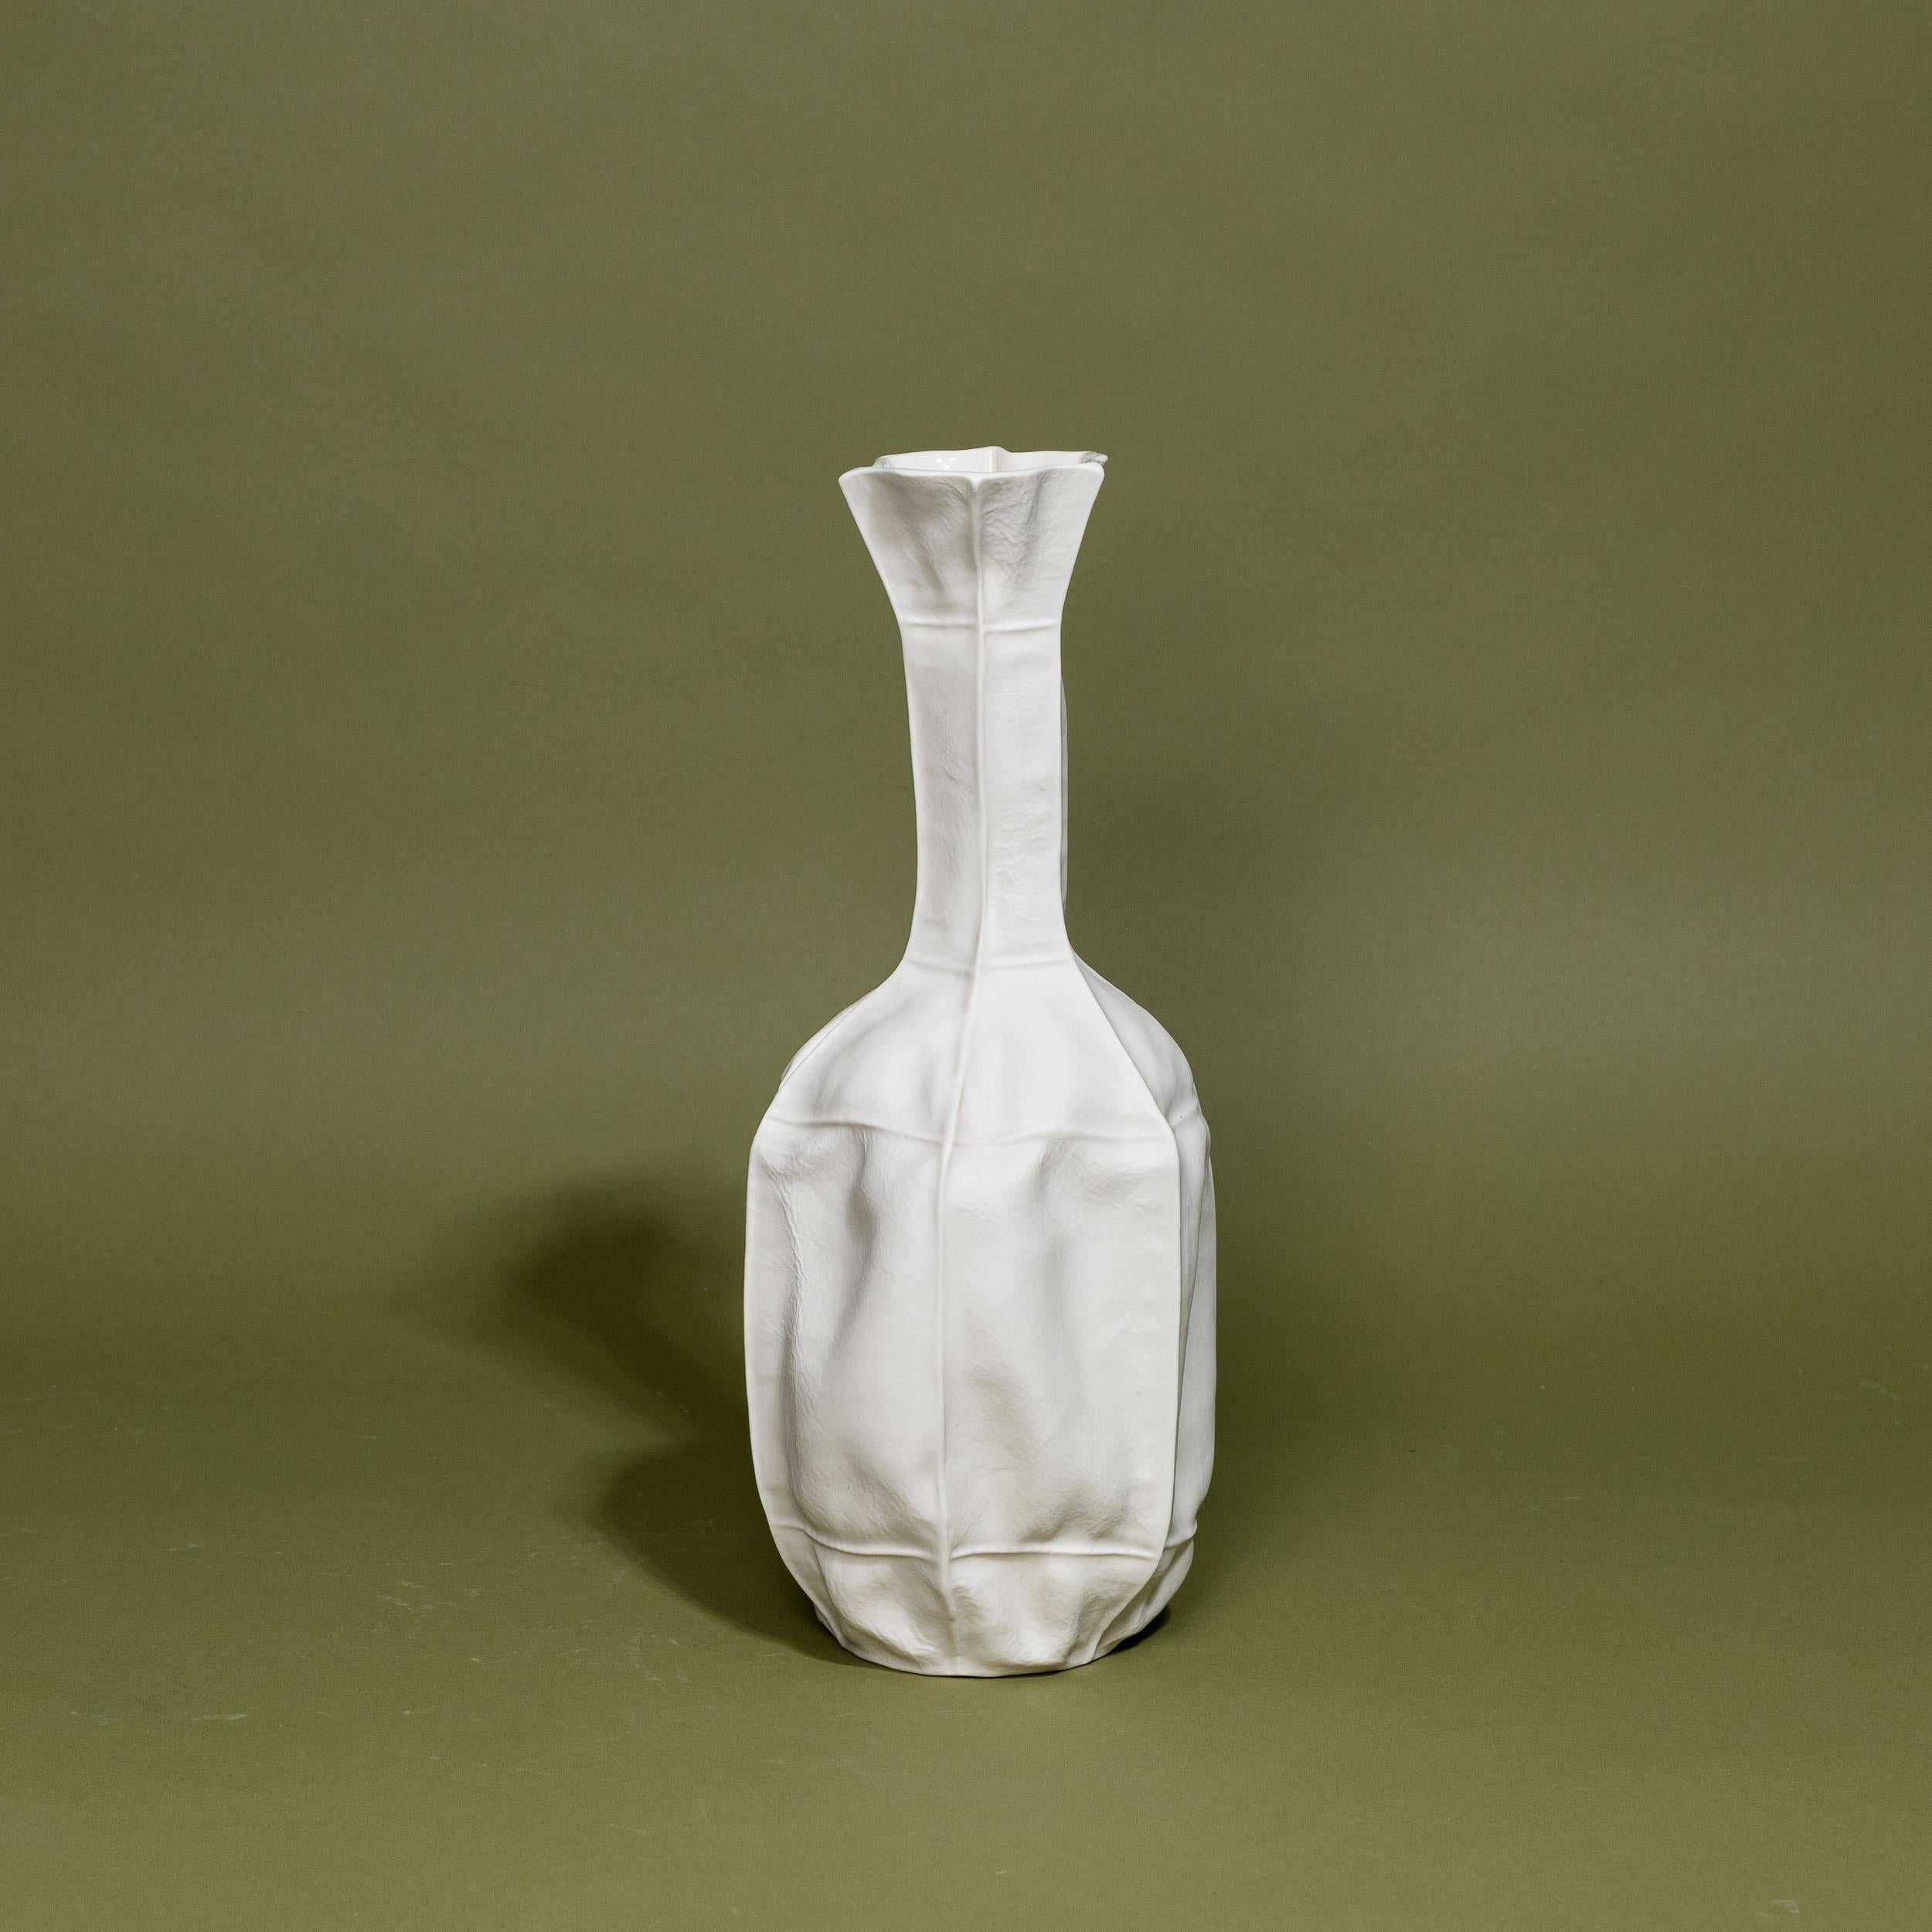 Pair of Sculptural White Ceramic Kawa Vases, by Luft Tanaka, organic, porcelain For Sale 1